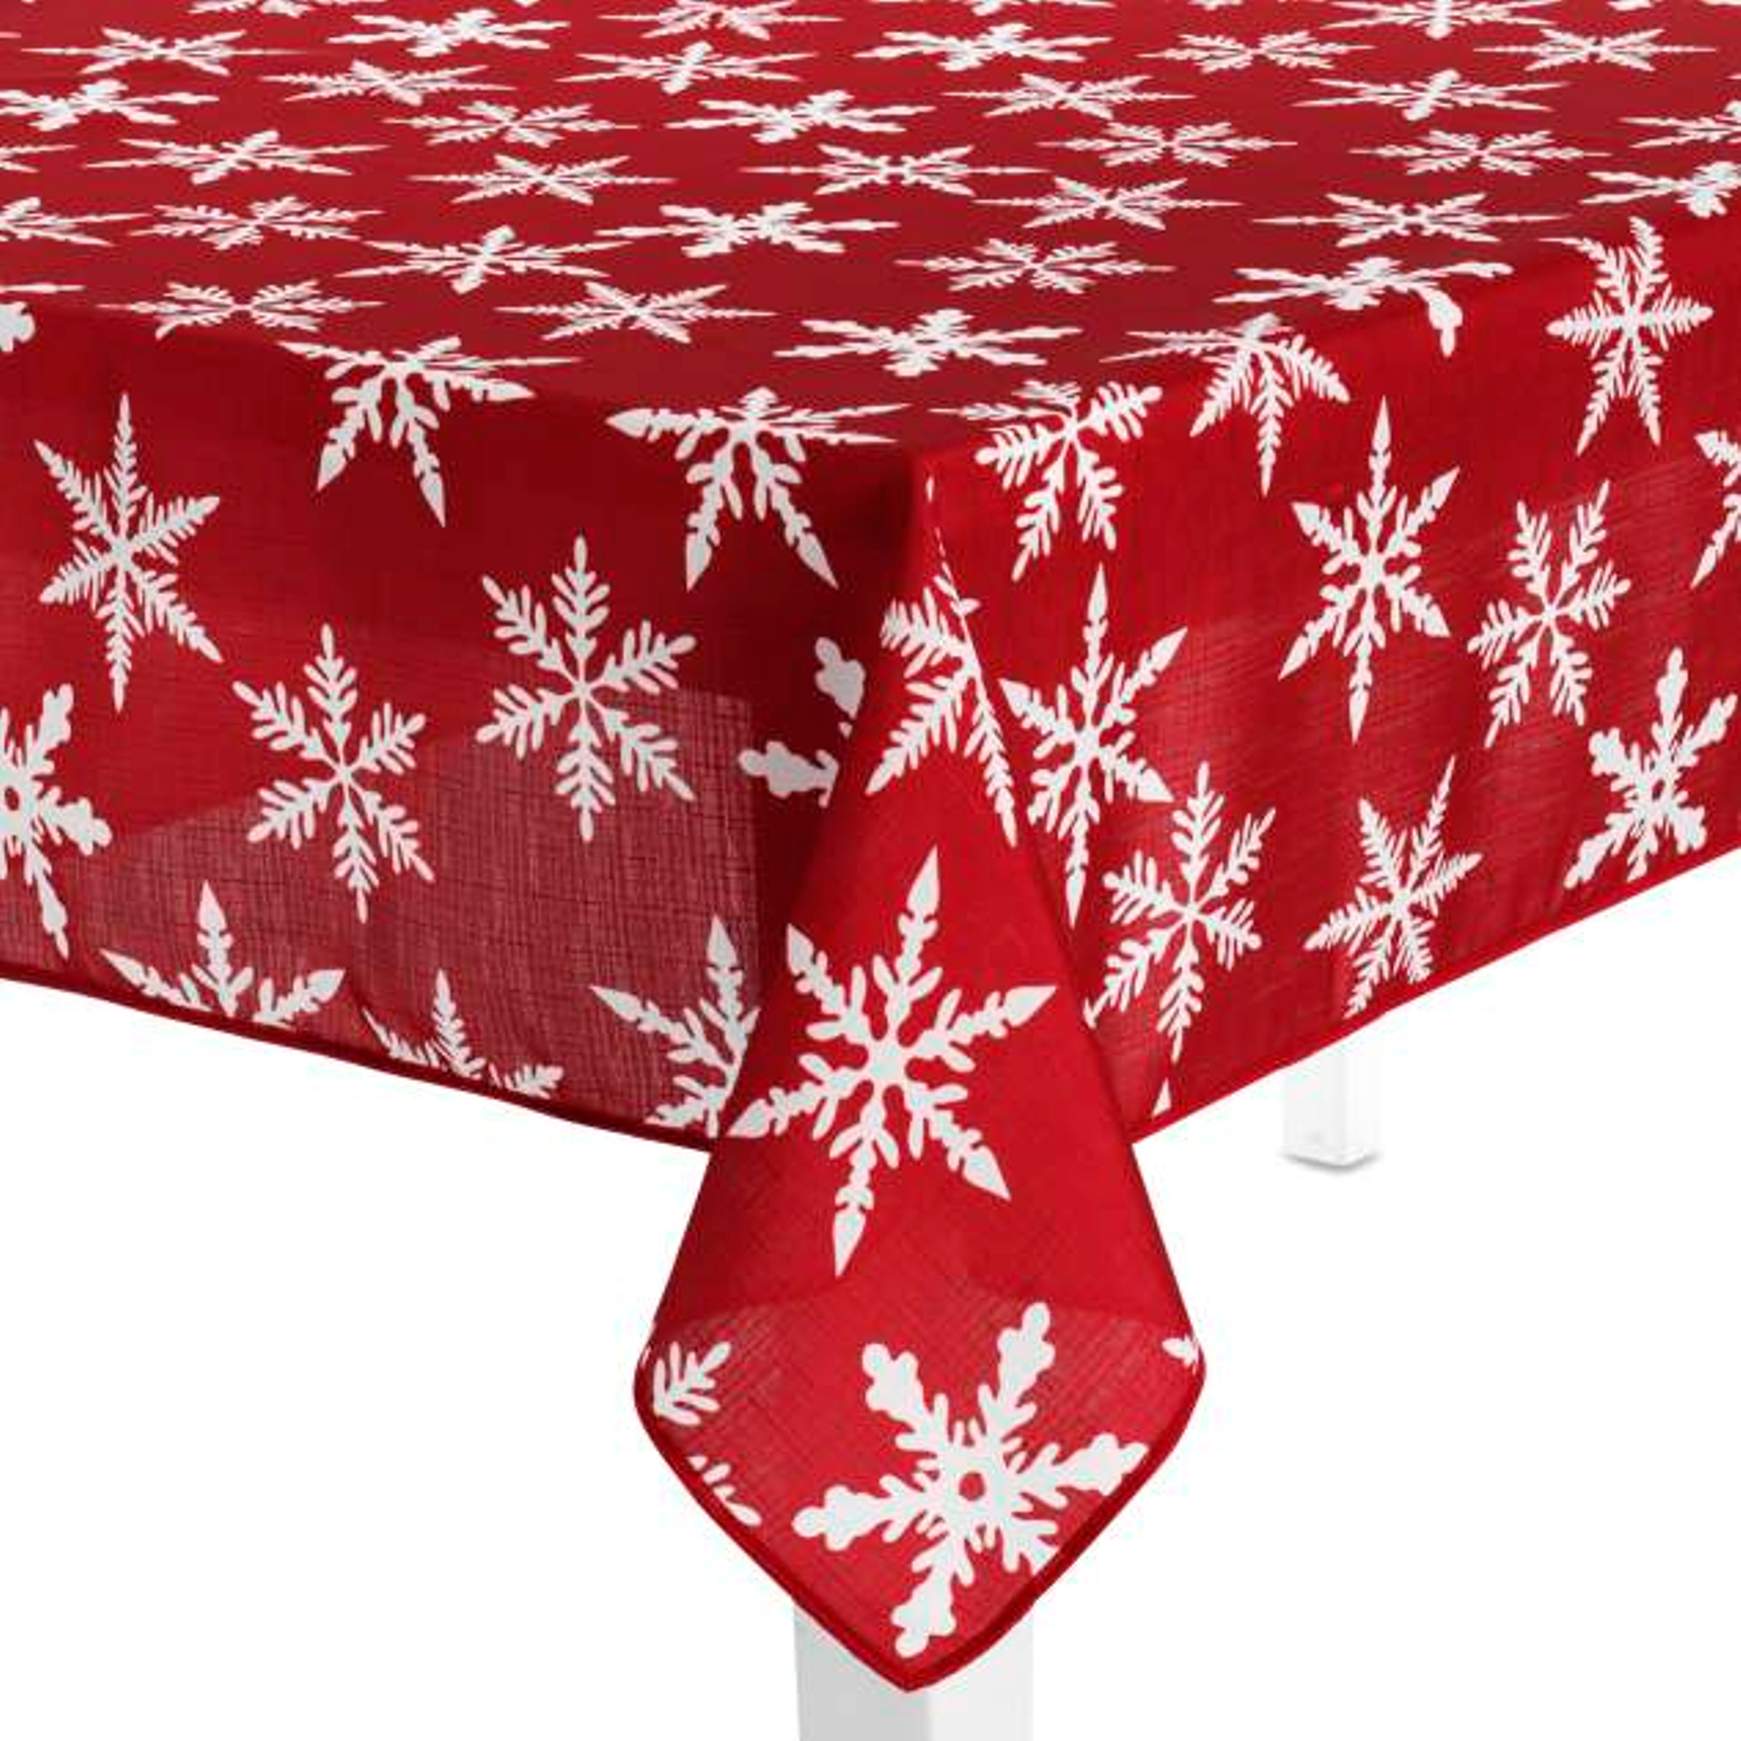 Essential Home 60" x 84" Snowflake Tablecloth Home